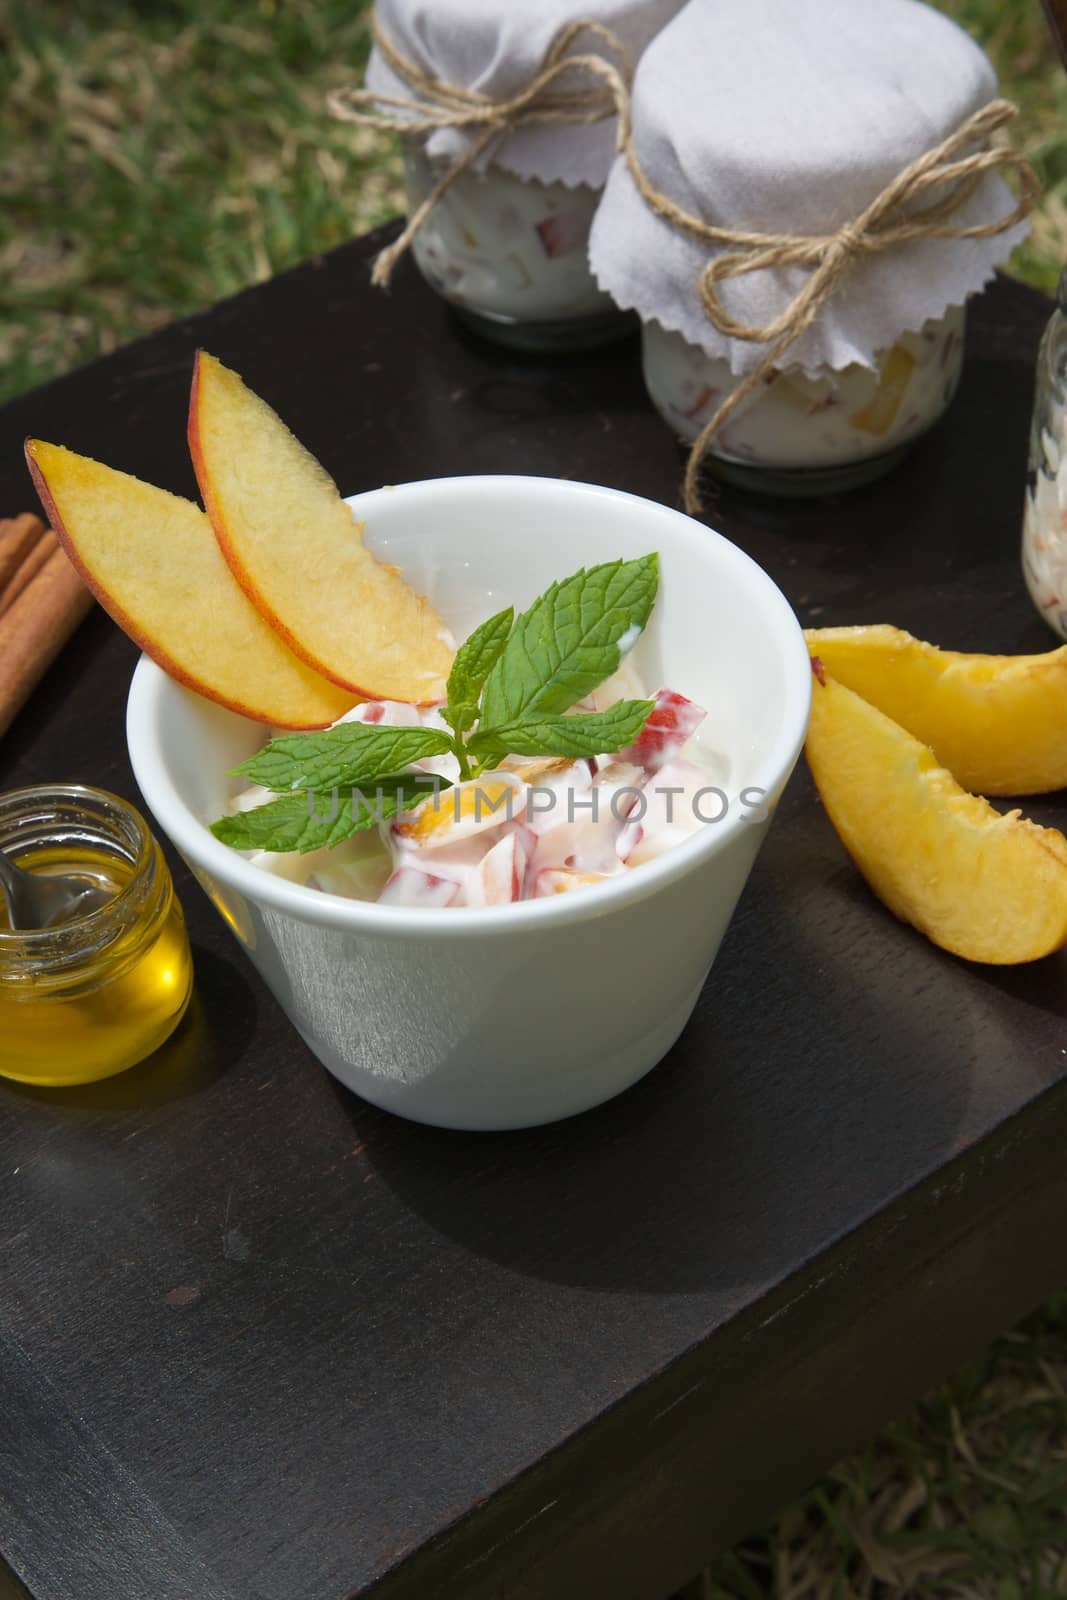 Homemade yogurt with pieces of fresh peach and cinnamon in a white dish on a black wooden surface. Pieces of peach, honey in the glass, cinnamon sticks and peach yogurt glasses in the background